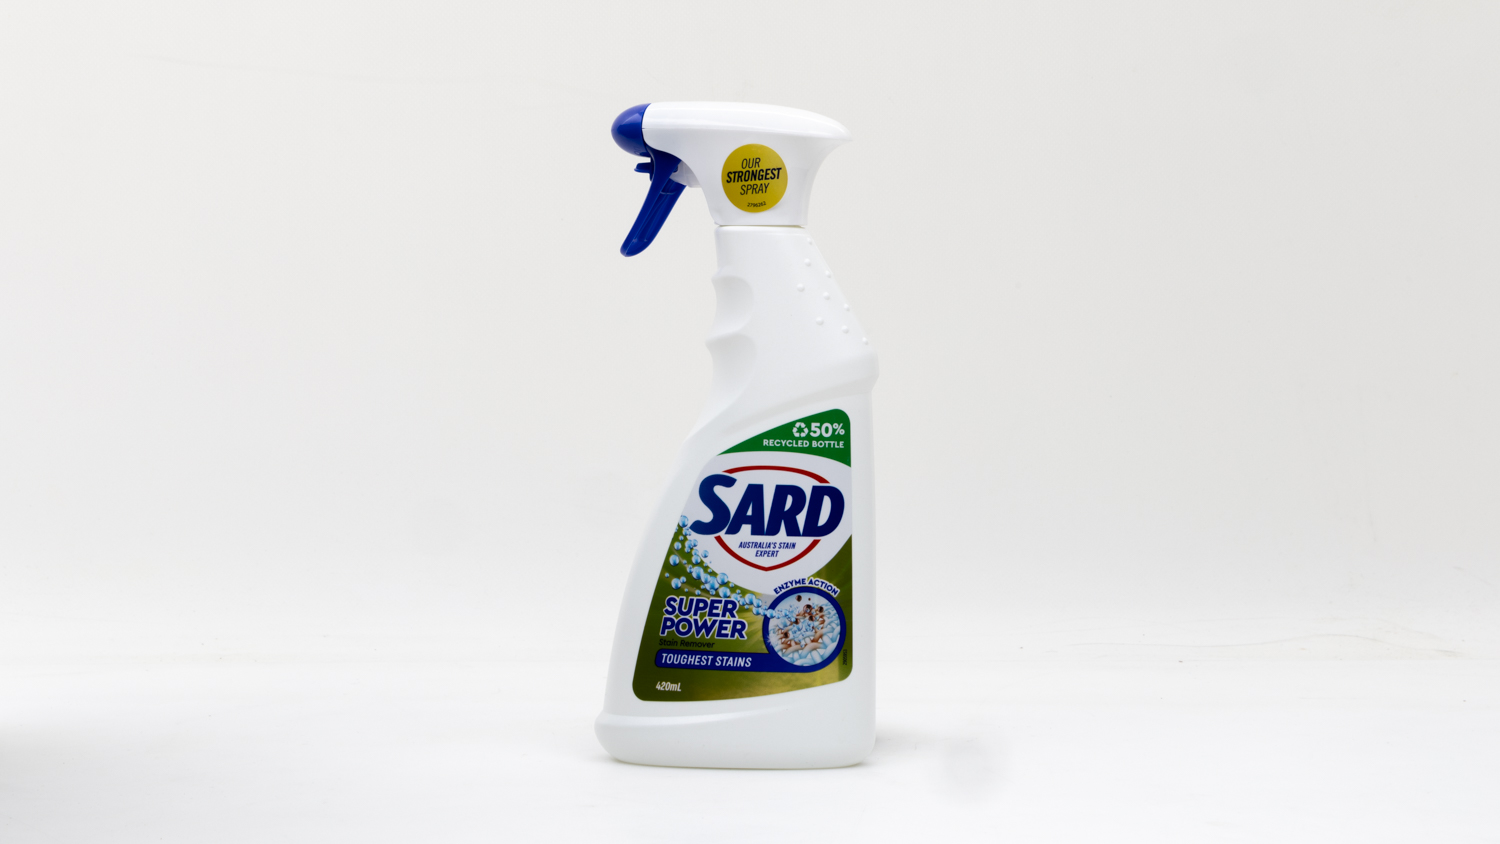 Sard Super Power Stain Remover Toughest Stains carousel image